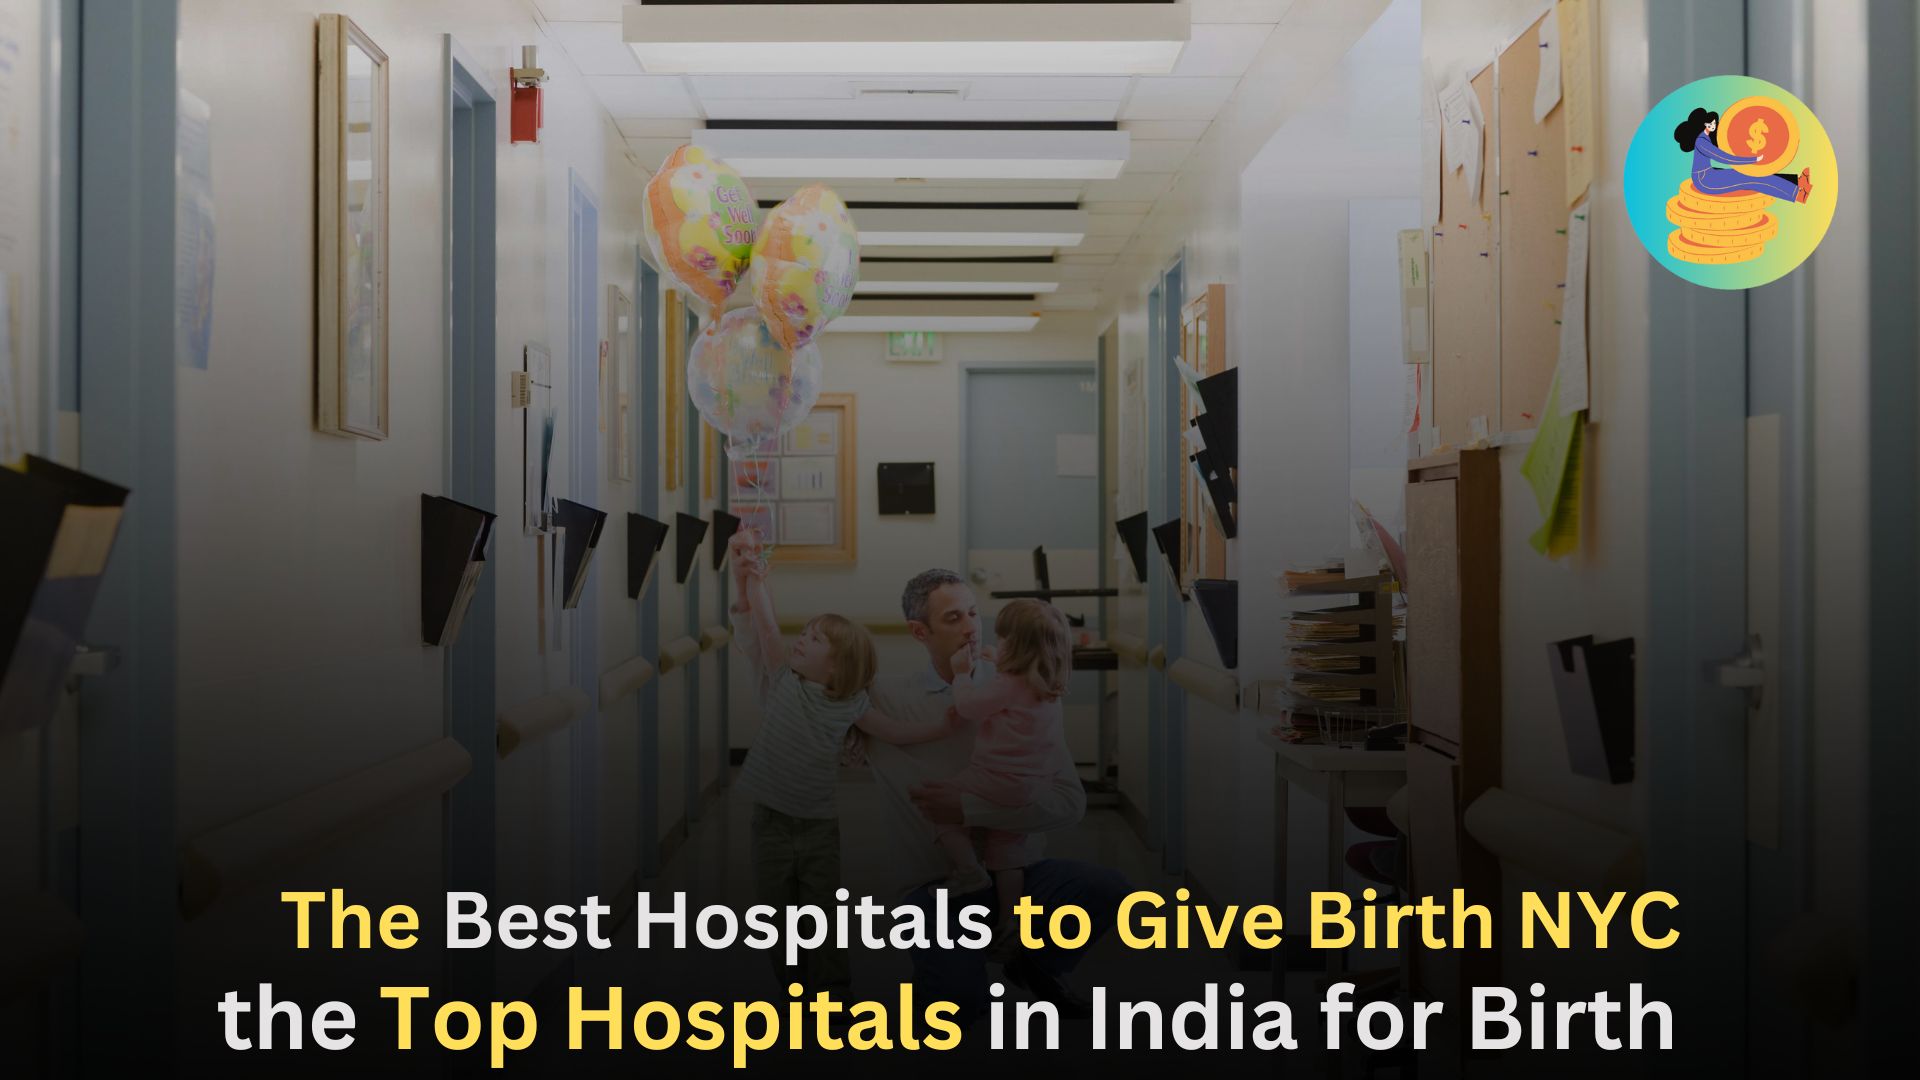 The Best Hospitals to Give Birth NYC,the Top Hospitals in India for Birth